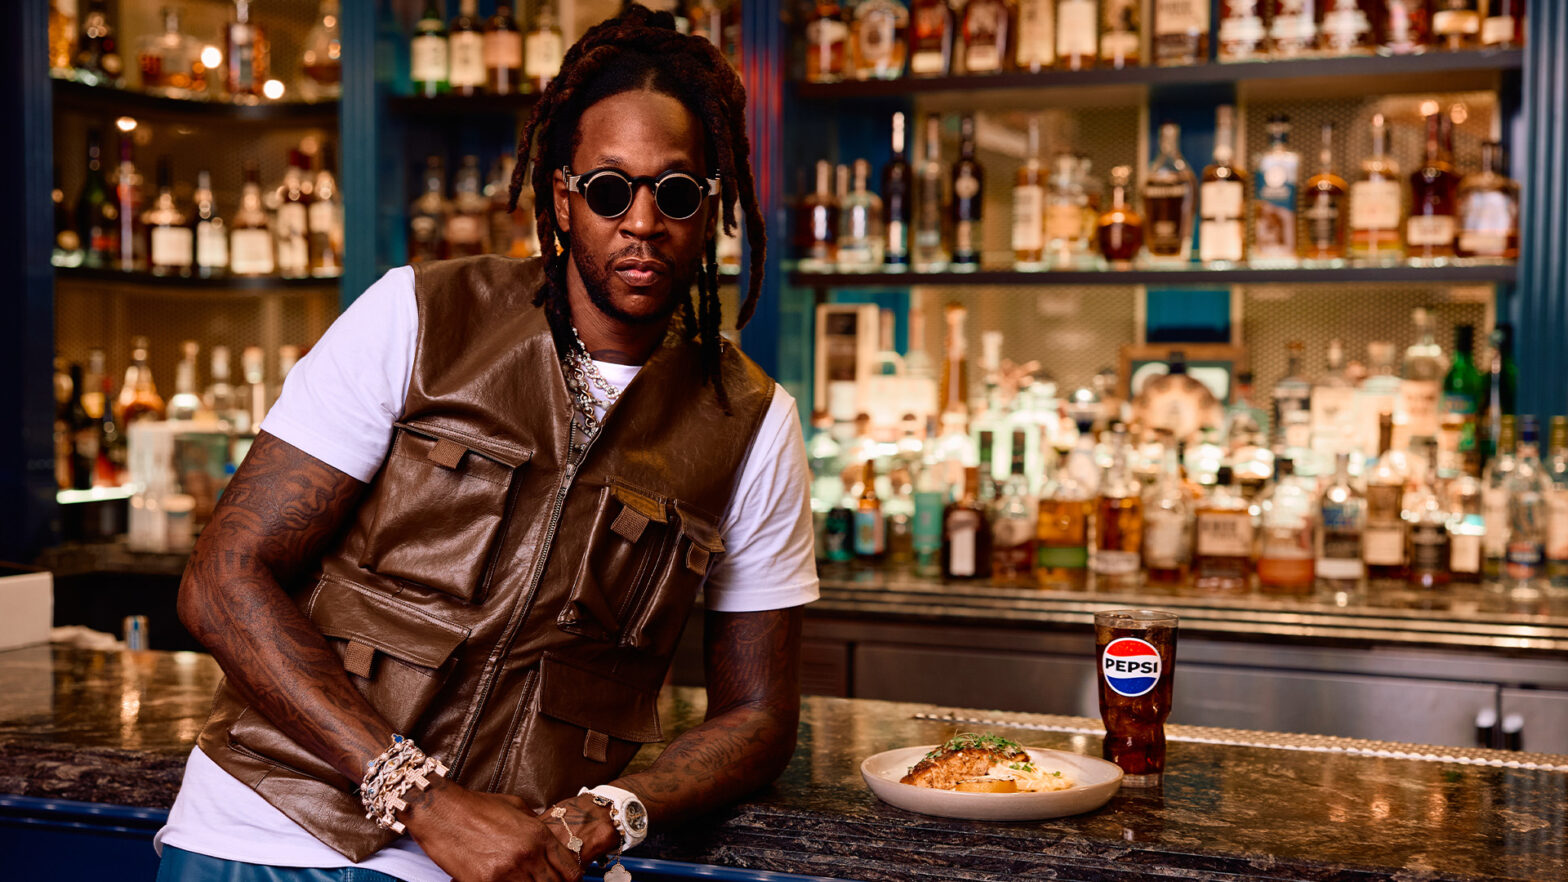 2 Chainz's Esco Restaurant And Tapas Among Eateries Chosen For PEPSI® Dig In Culinary Residency Program